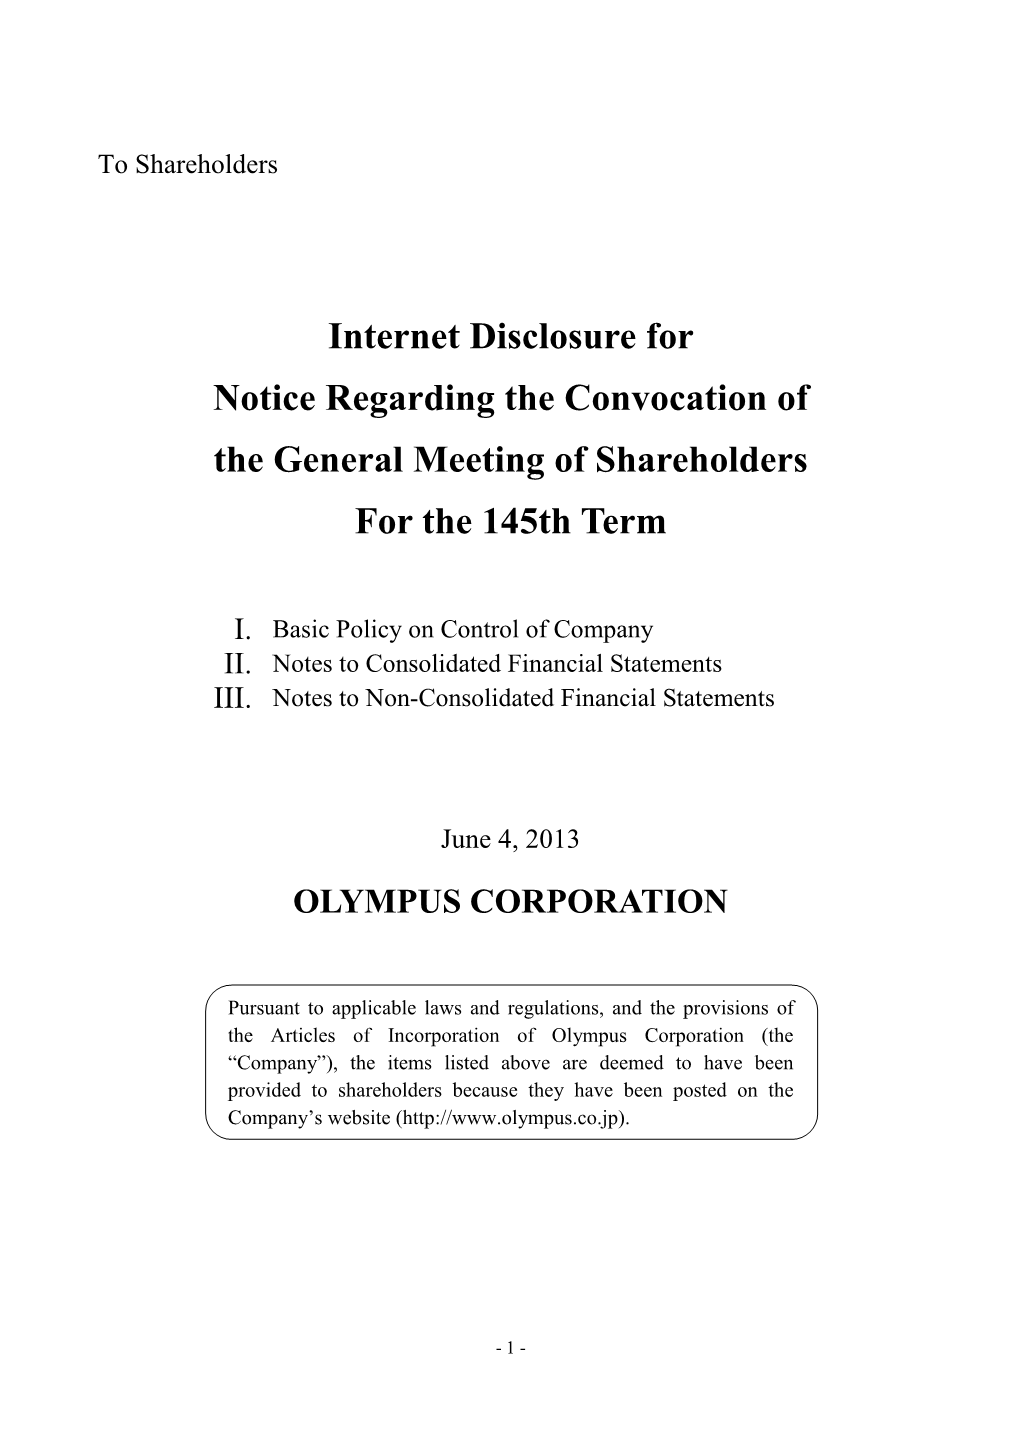 Internet Disclosure for Notice Regarding the Convocation of the General Meeting of Shareholders for the 145Th Term